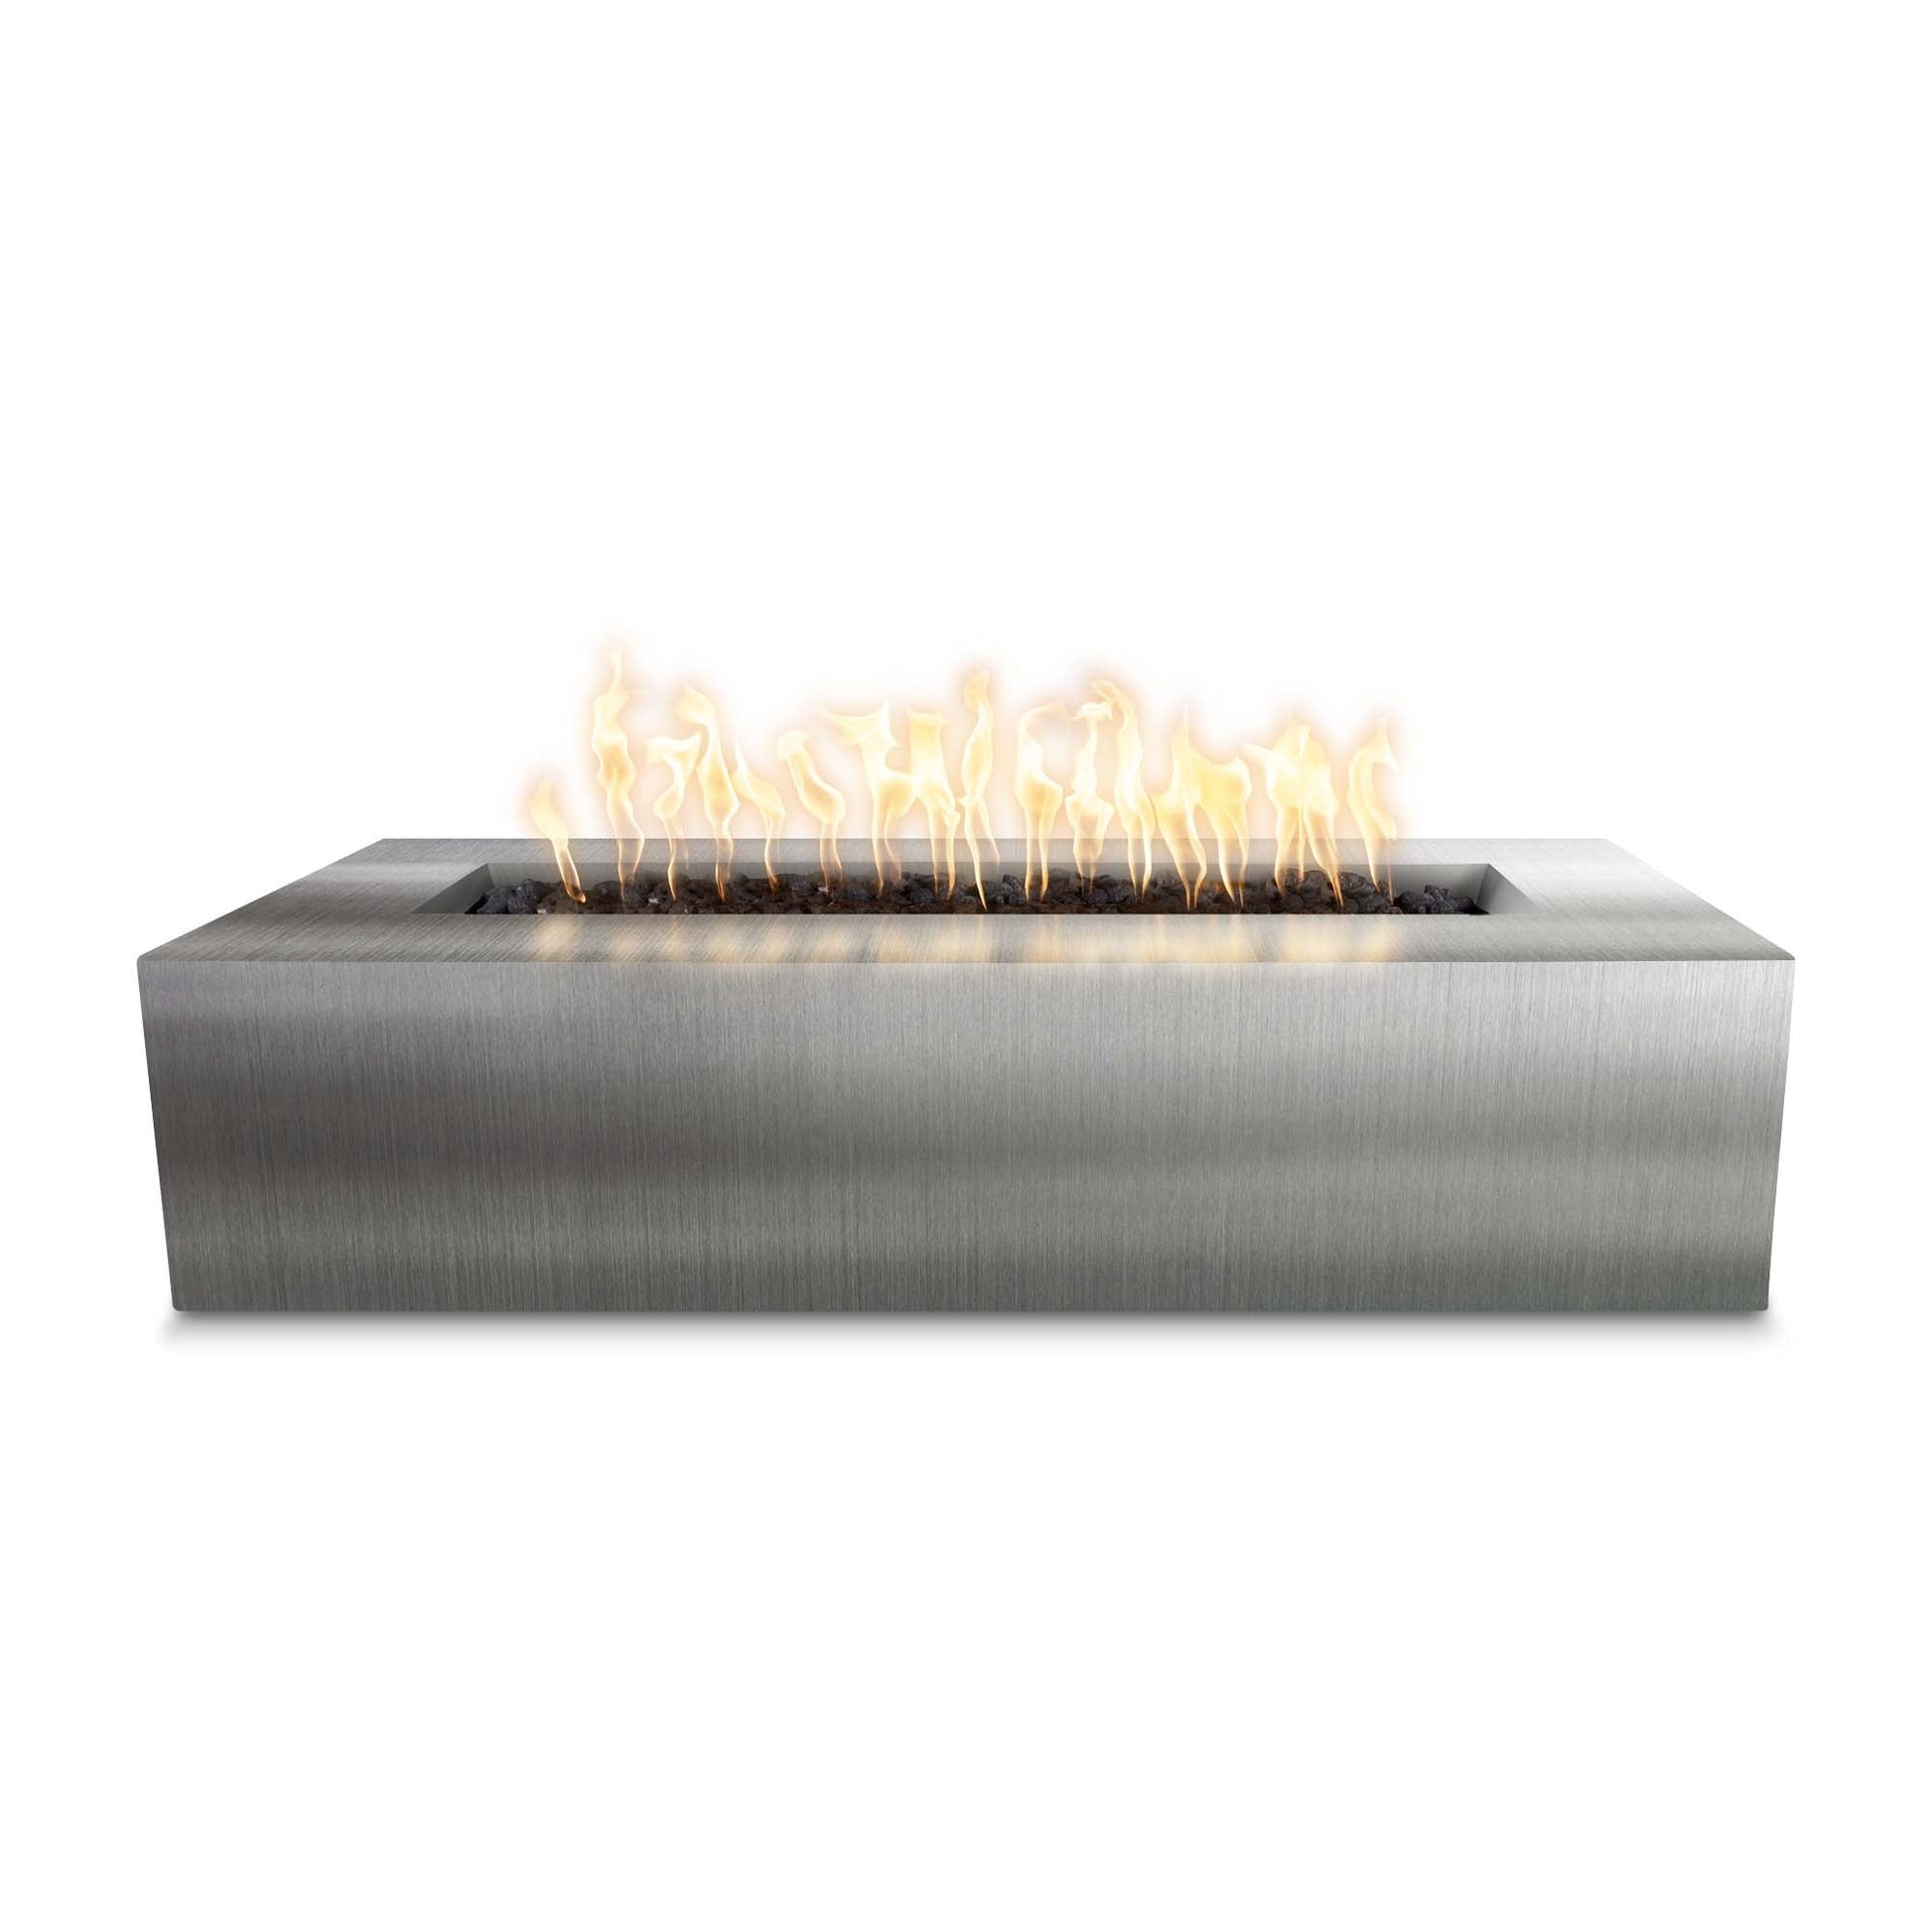 The Outdoor Plus Rectangular Regal 48" Stainless Steel Liquid Propane Fire Pit with 110V Electronic Ignition